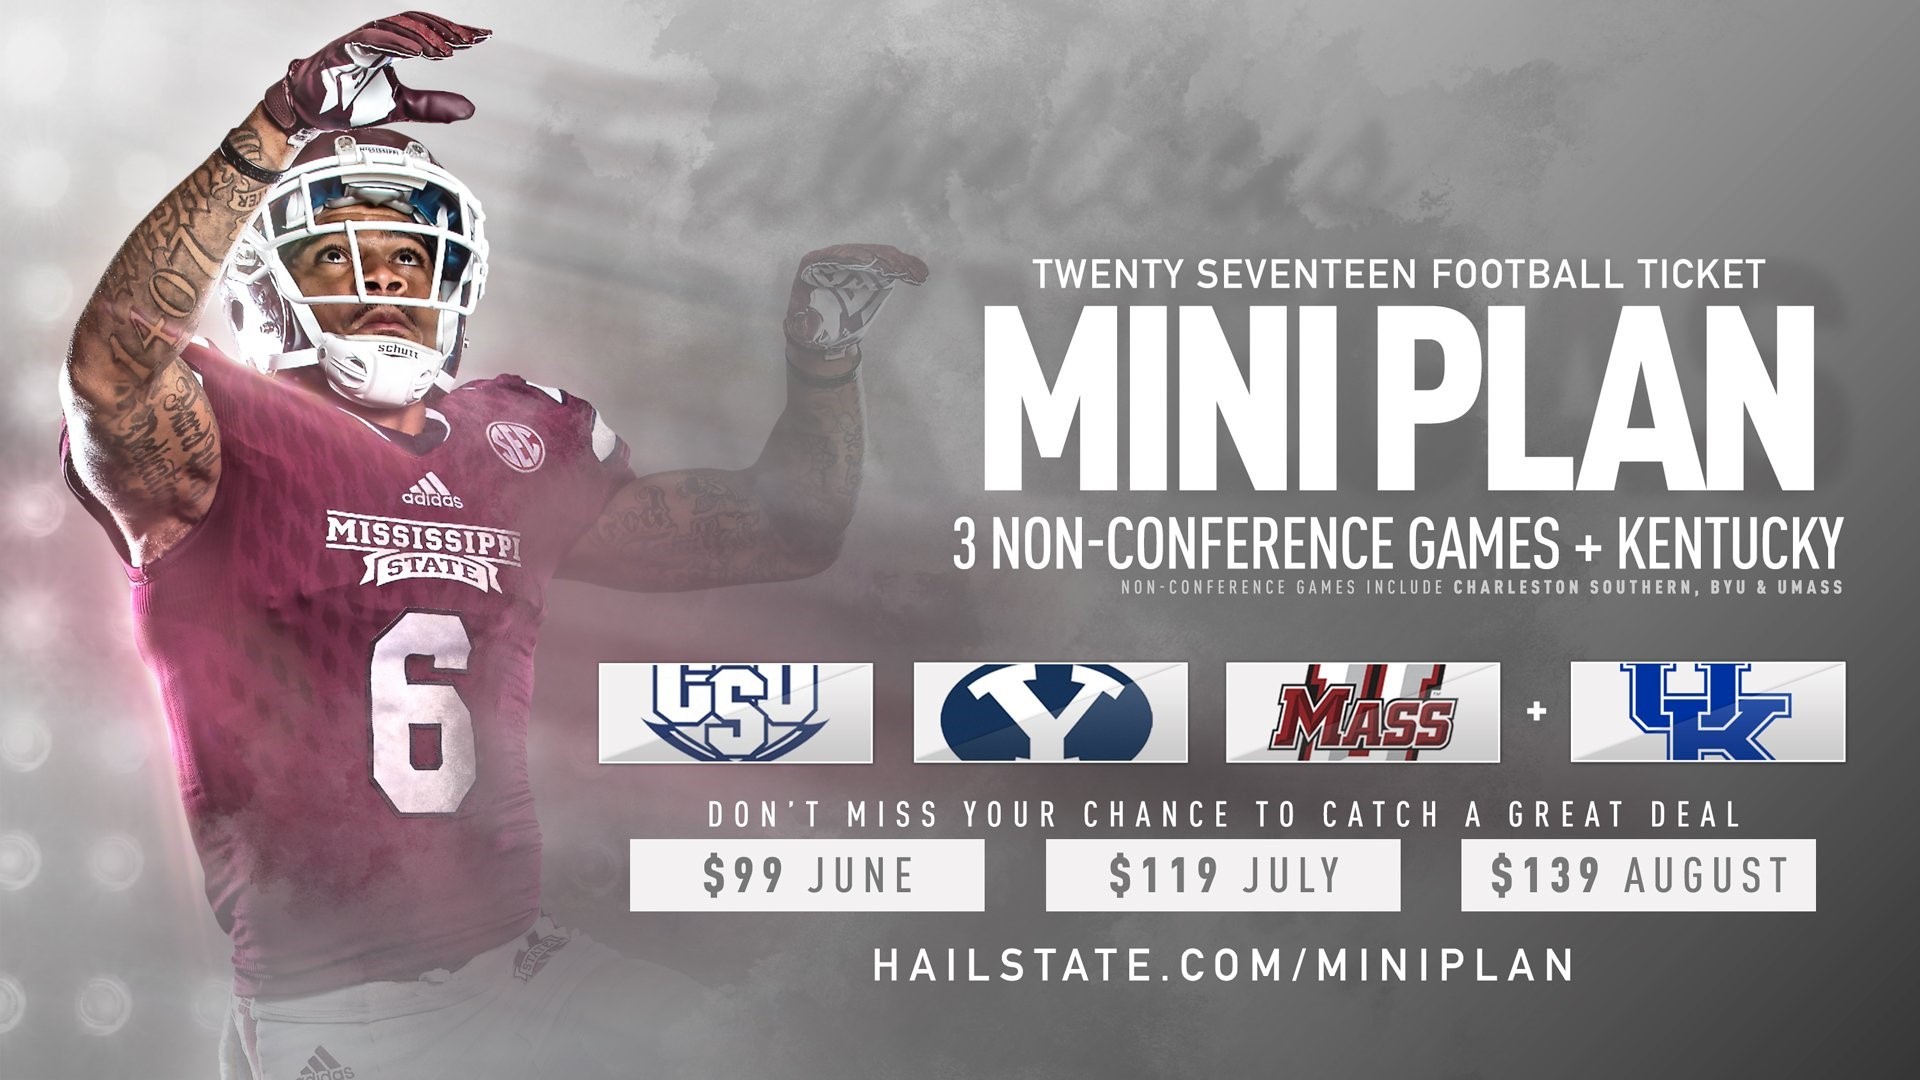 1920x1080 Football Ticket Mini-Plans on Sale Now, Special $99 in June